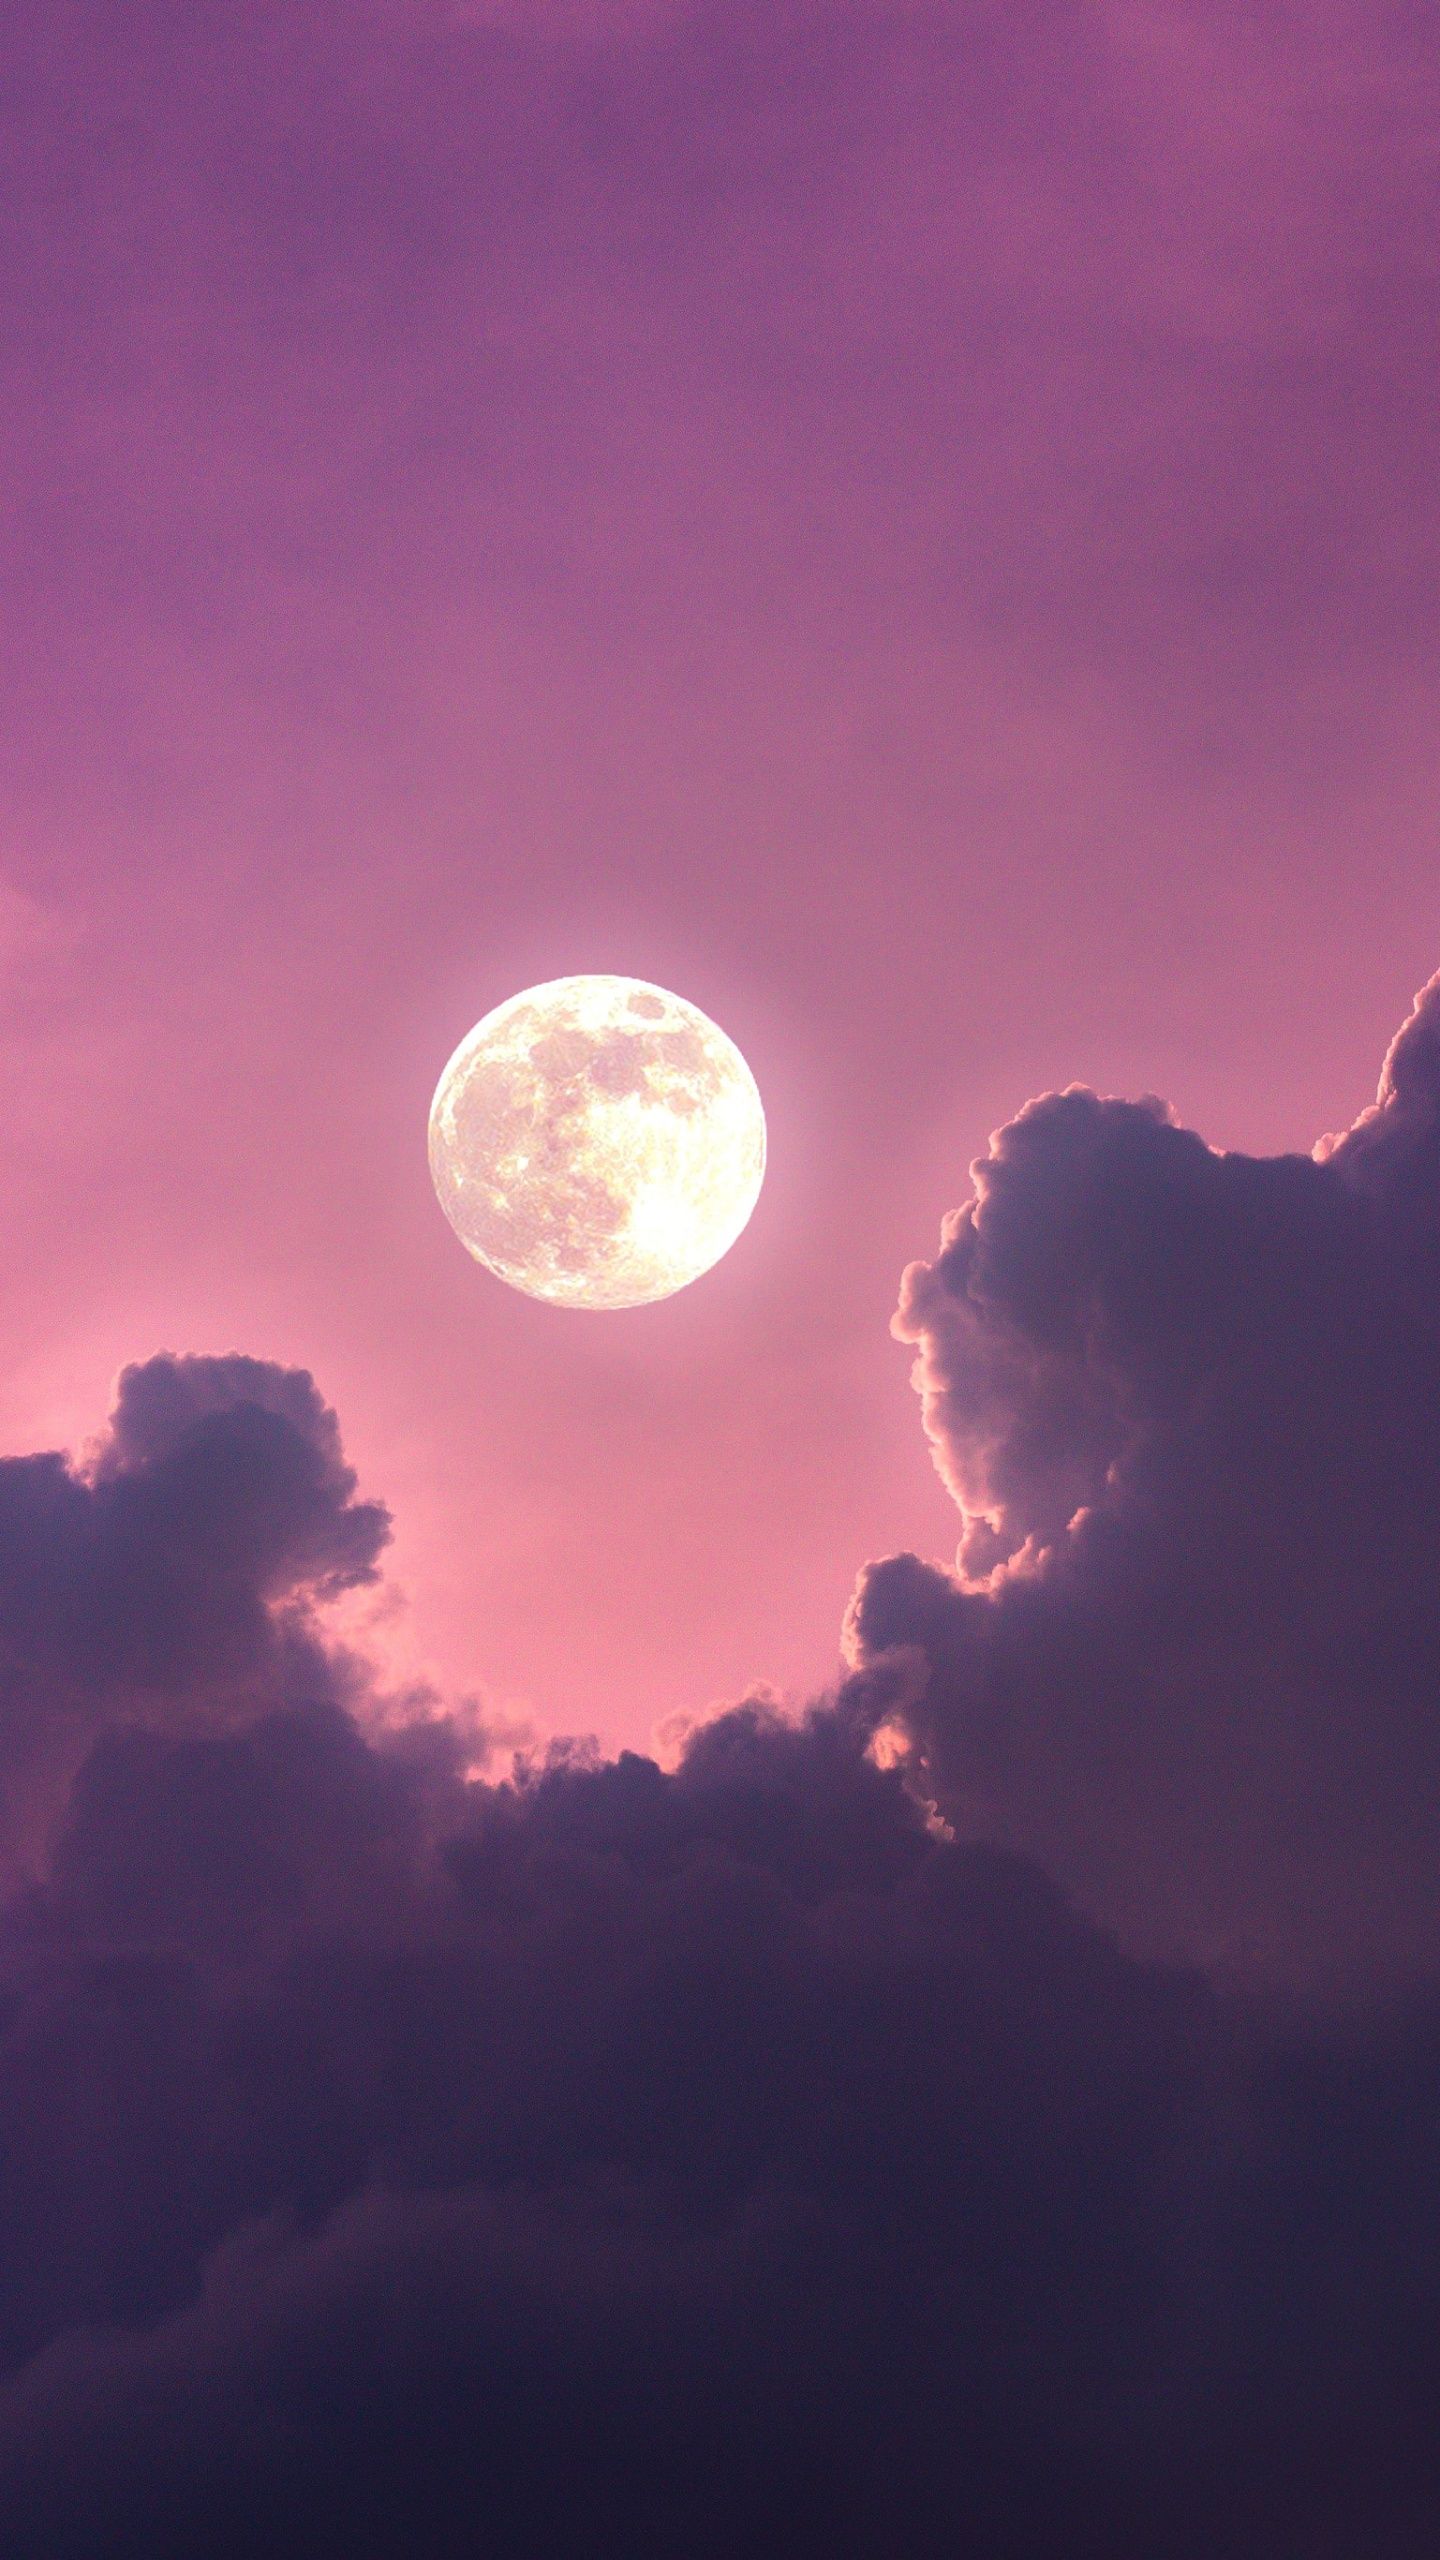 A full moon is in the sky - Pink, moon, pink phone, cloud, sky, scenery